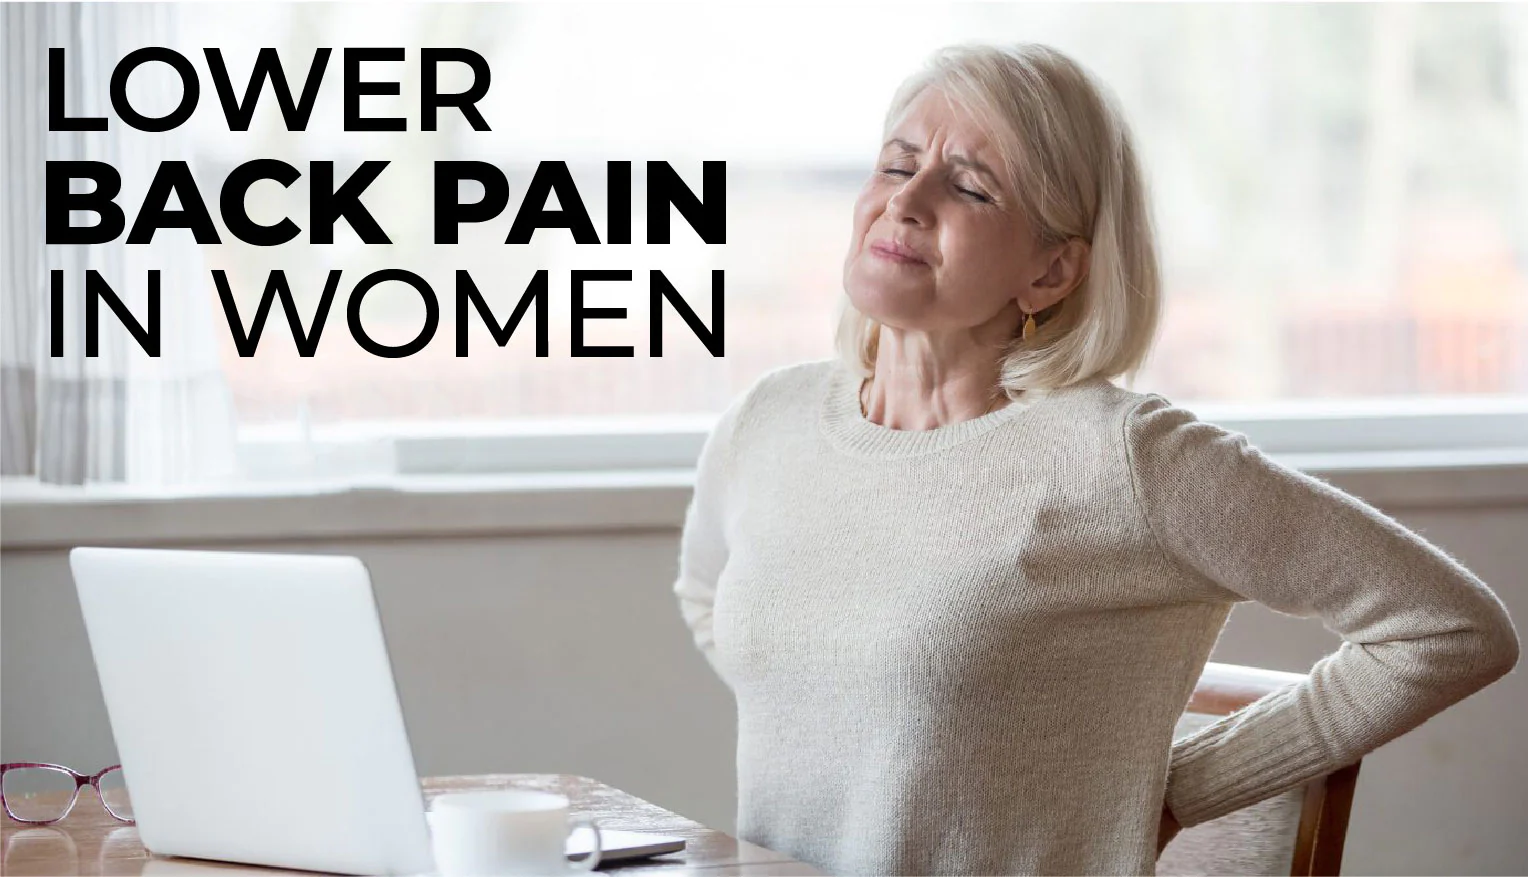 What Causes Lower Back Pain in Females?